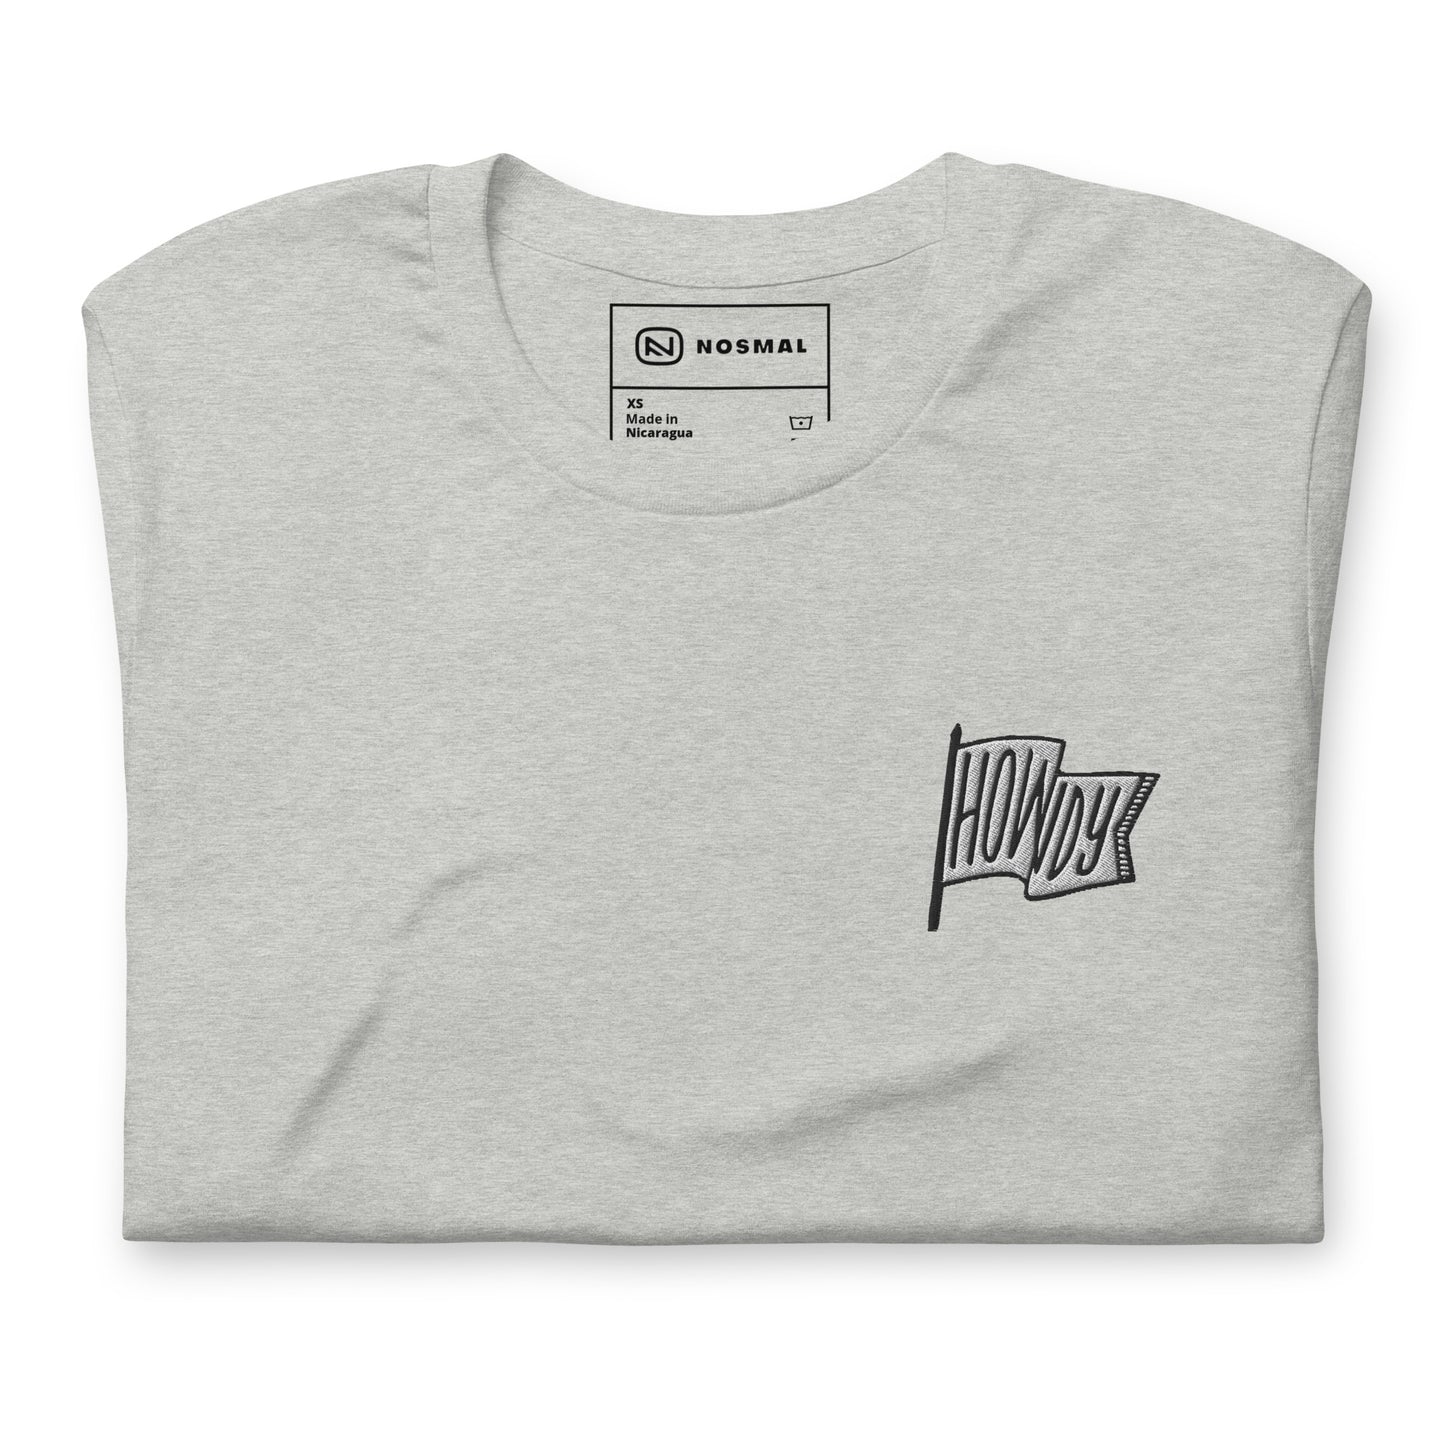 Top down view of howdy embroidered design on heather athletic grey unisex t-shirt.